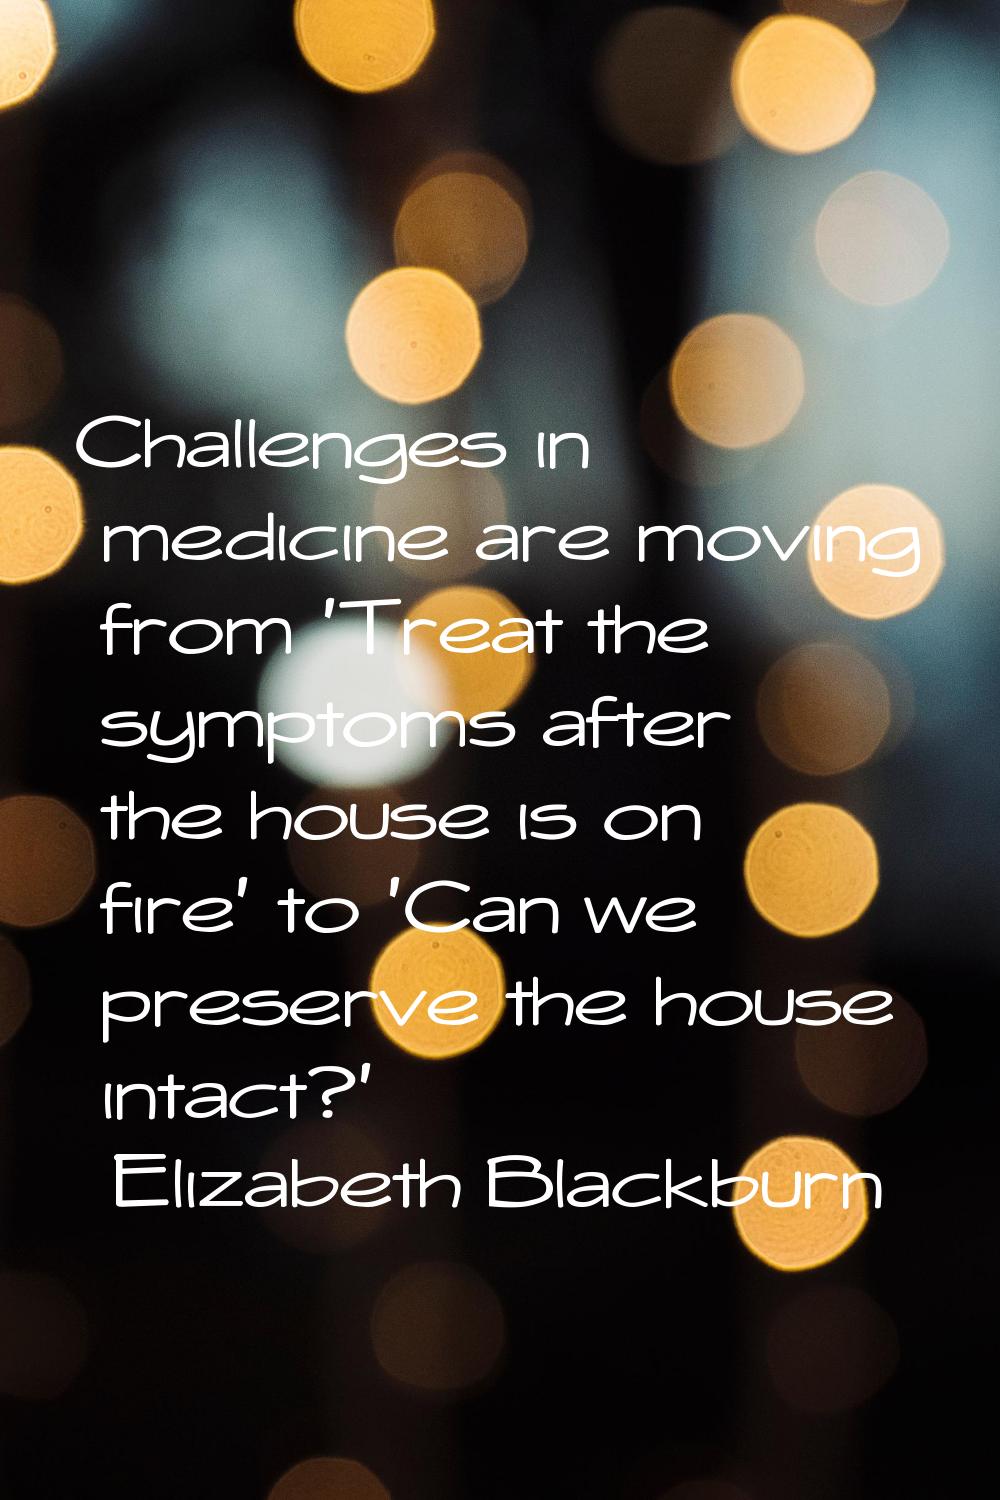 Challenges in medicine are moving from 'Treat the symptoms after the house is on fire' to 'Can we p